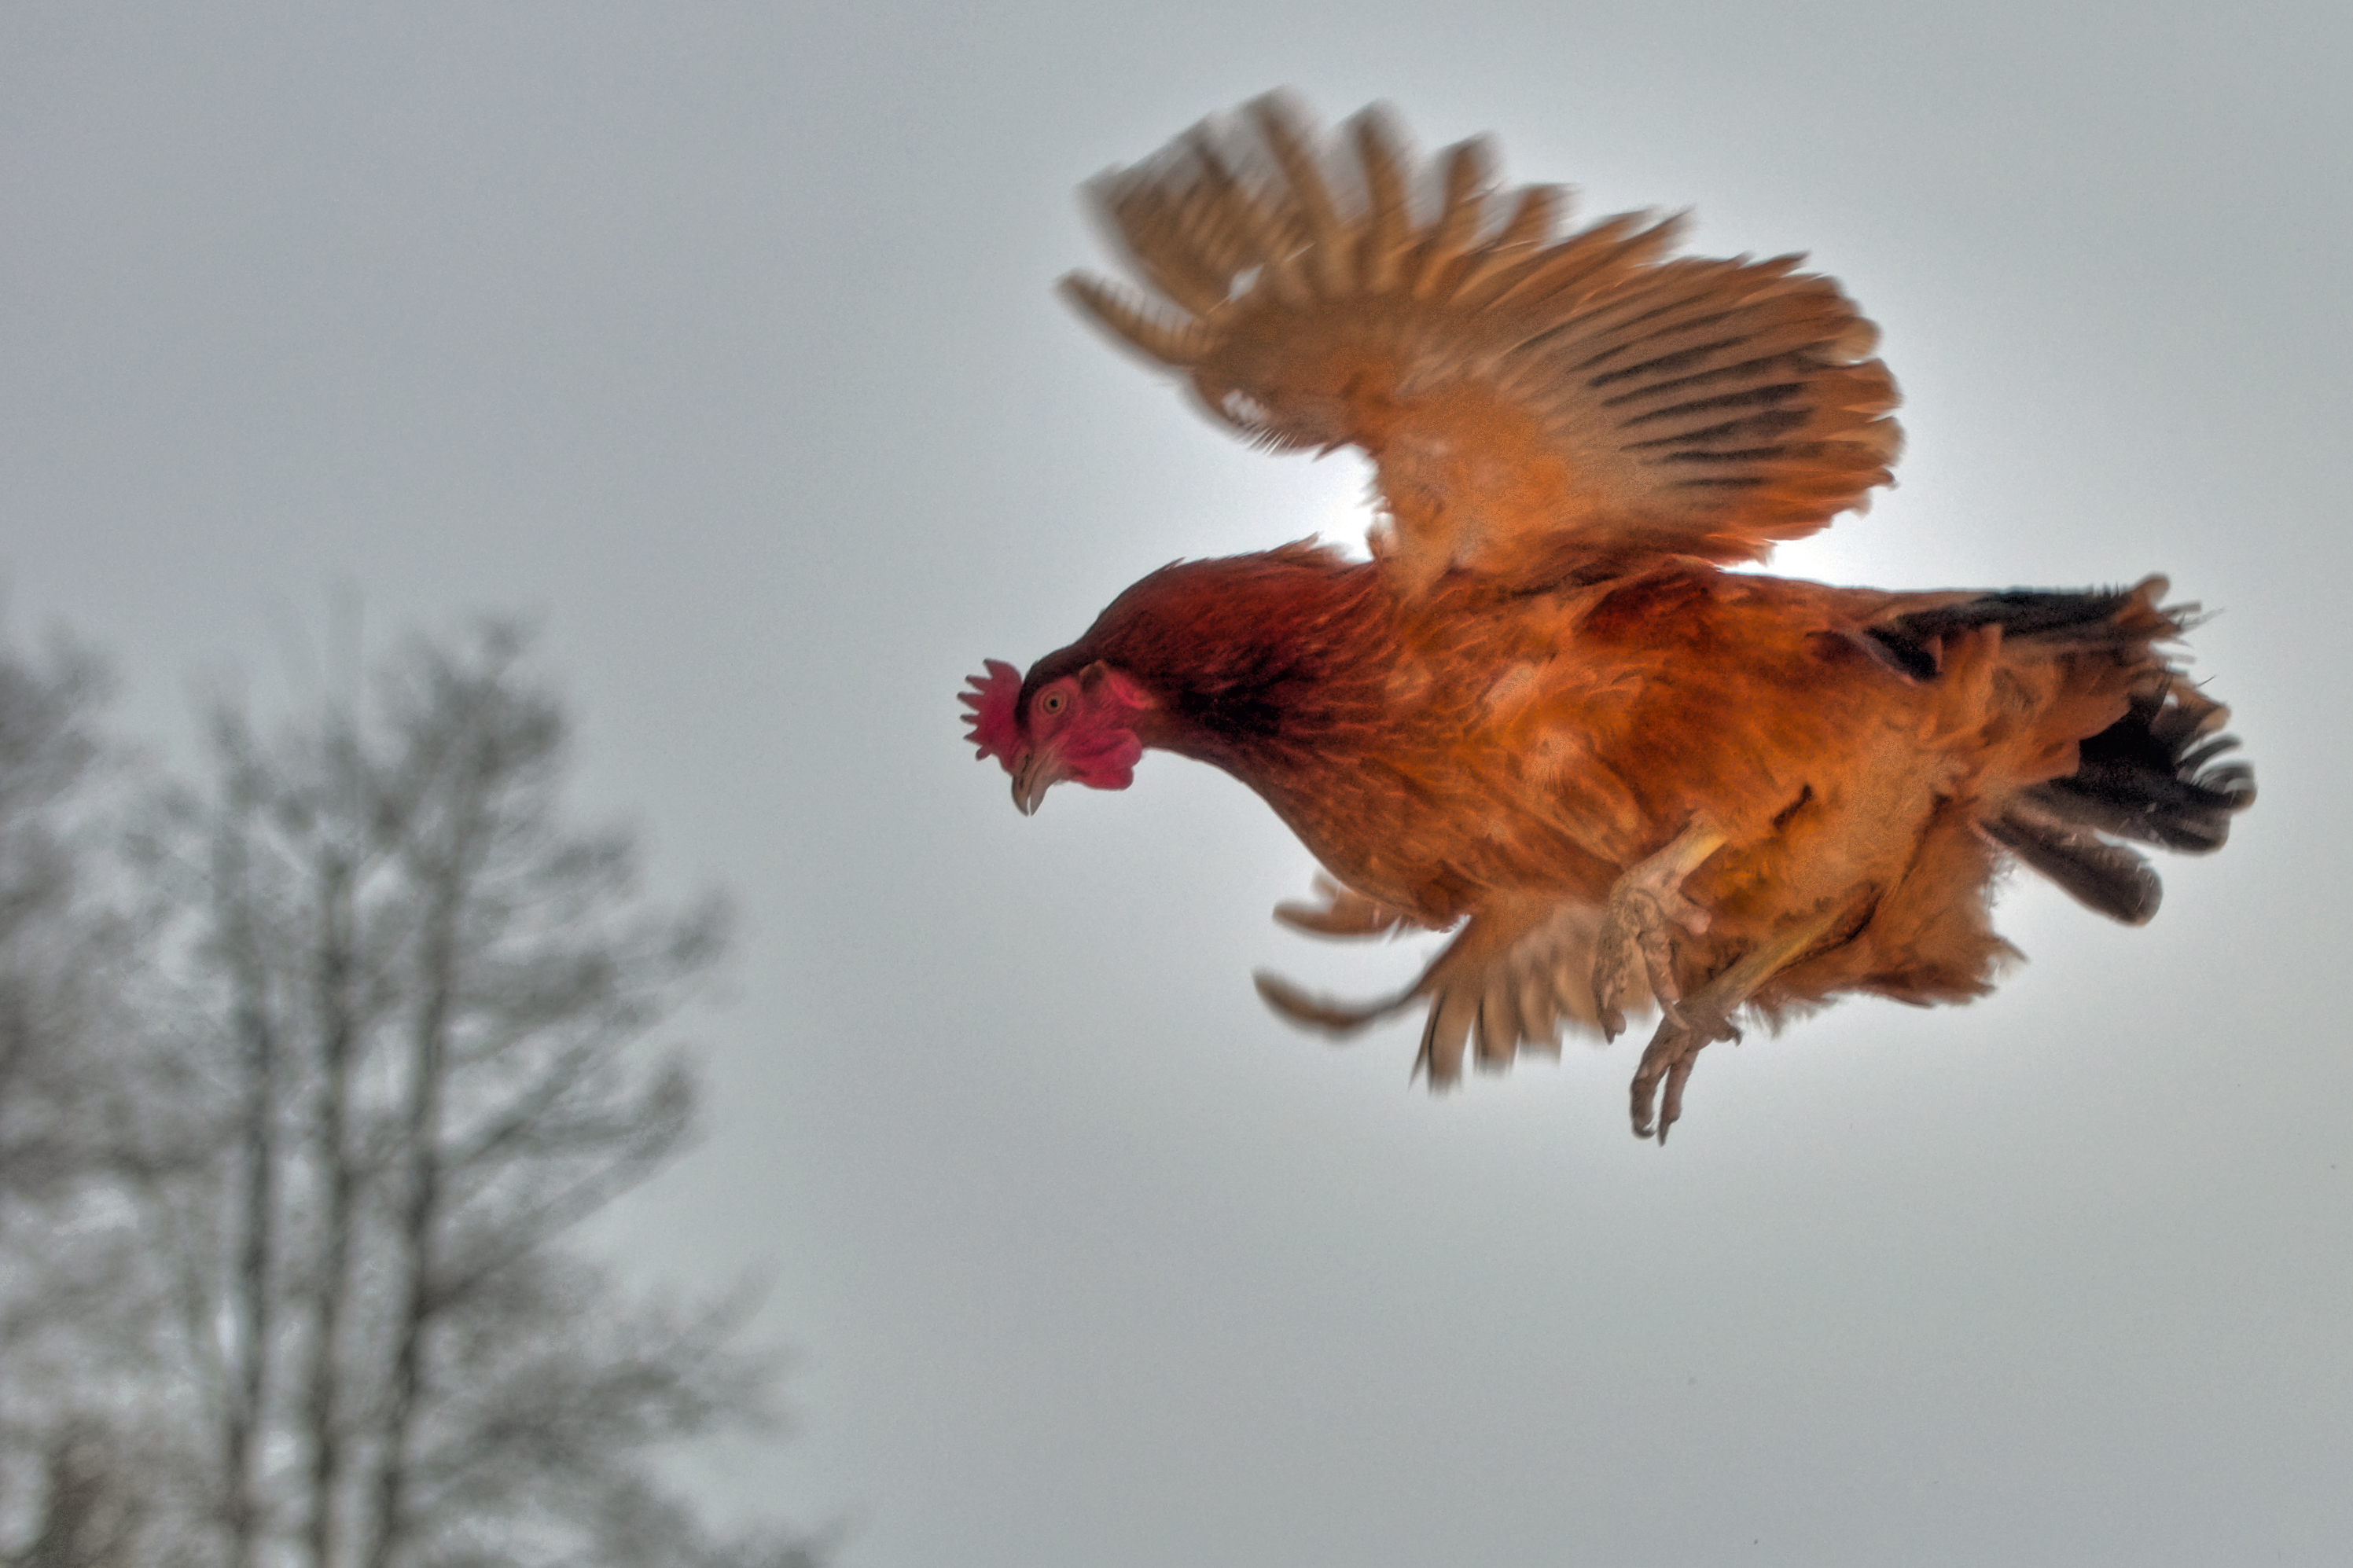 The longest recorded flight of a chicken was 13 seconds.